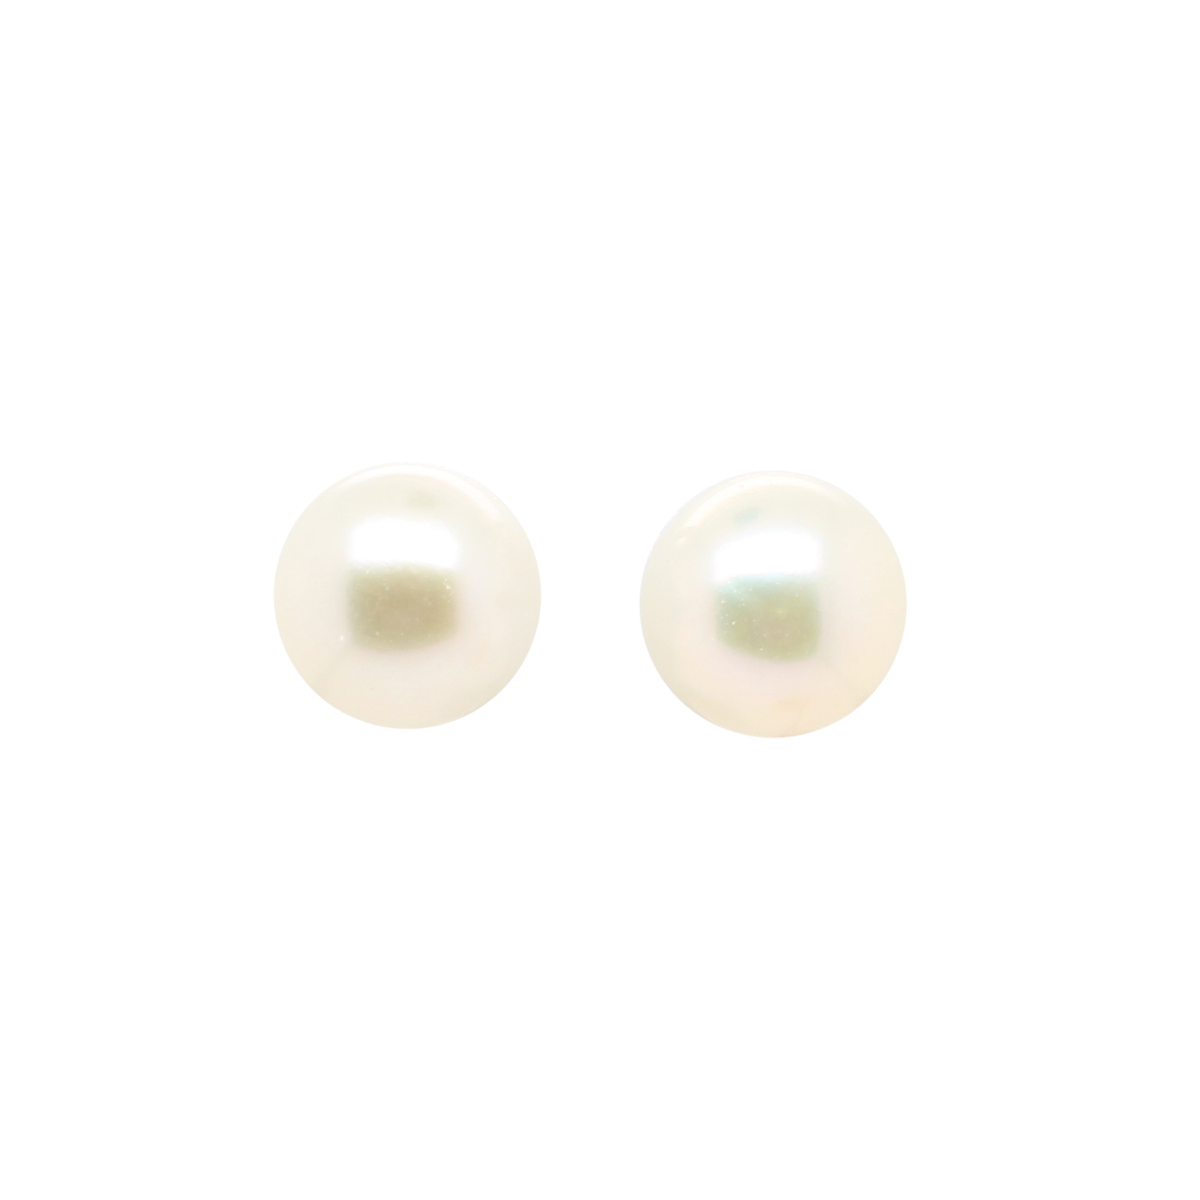 China Pearl 14 Karat White Gold Freshwater Cultured Pearl Earrings  Each Earring Contains One Pearl Measuring 8-9mm  AAA Quality